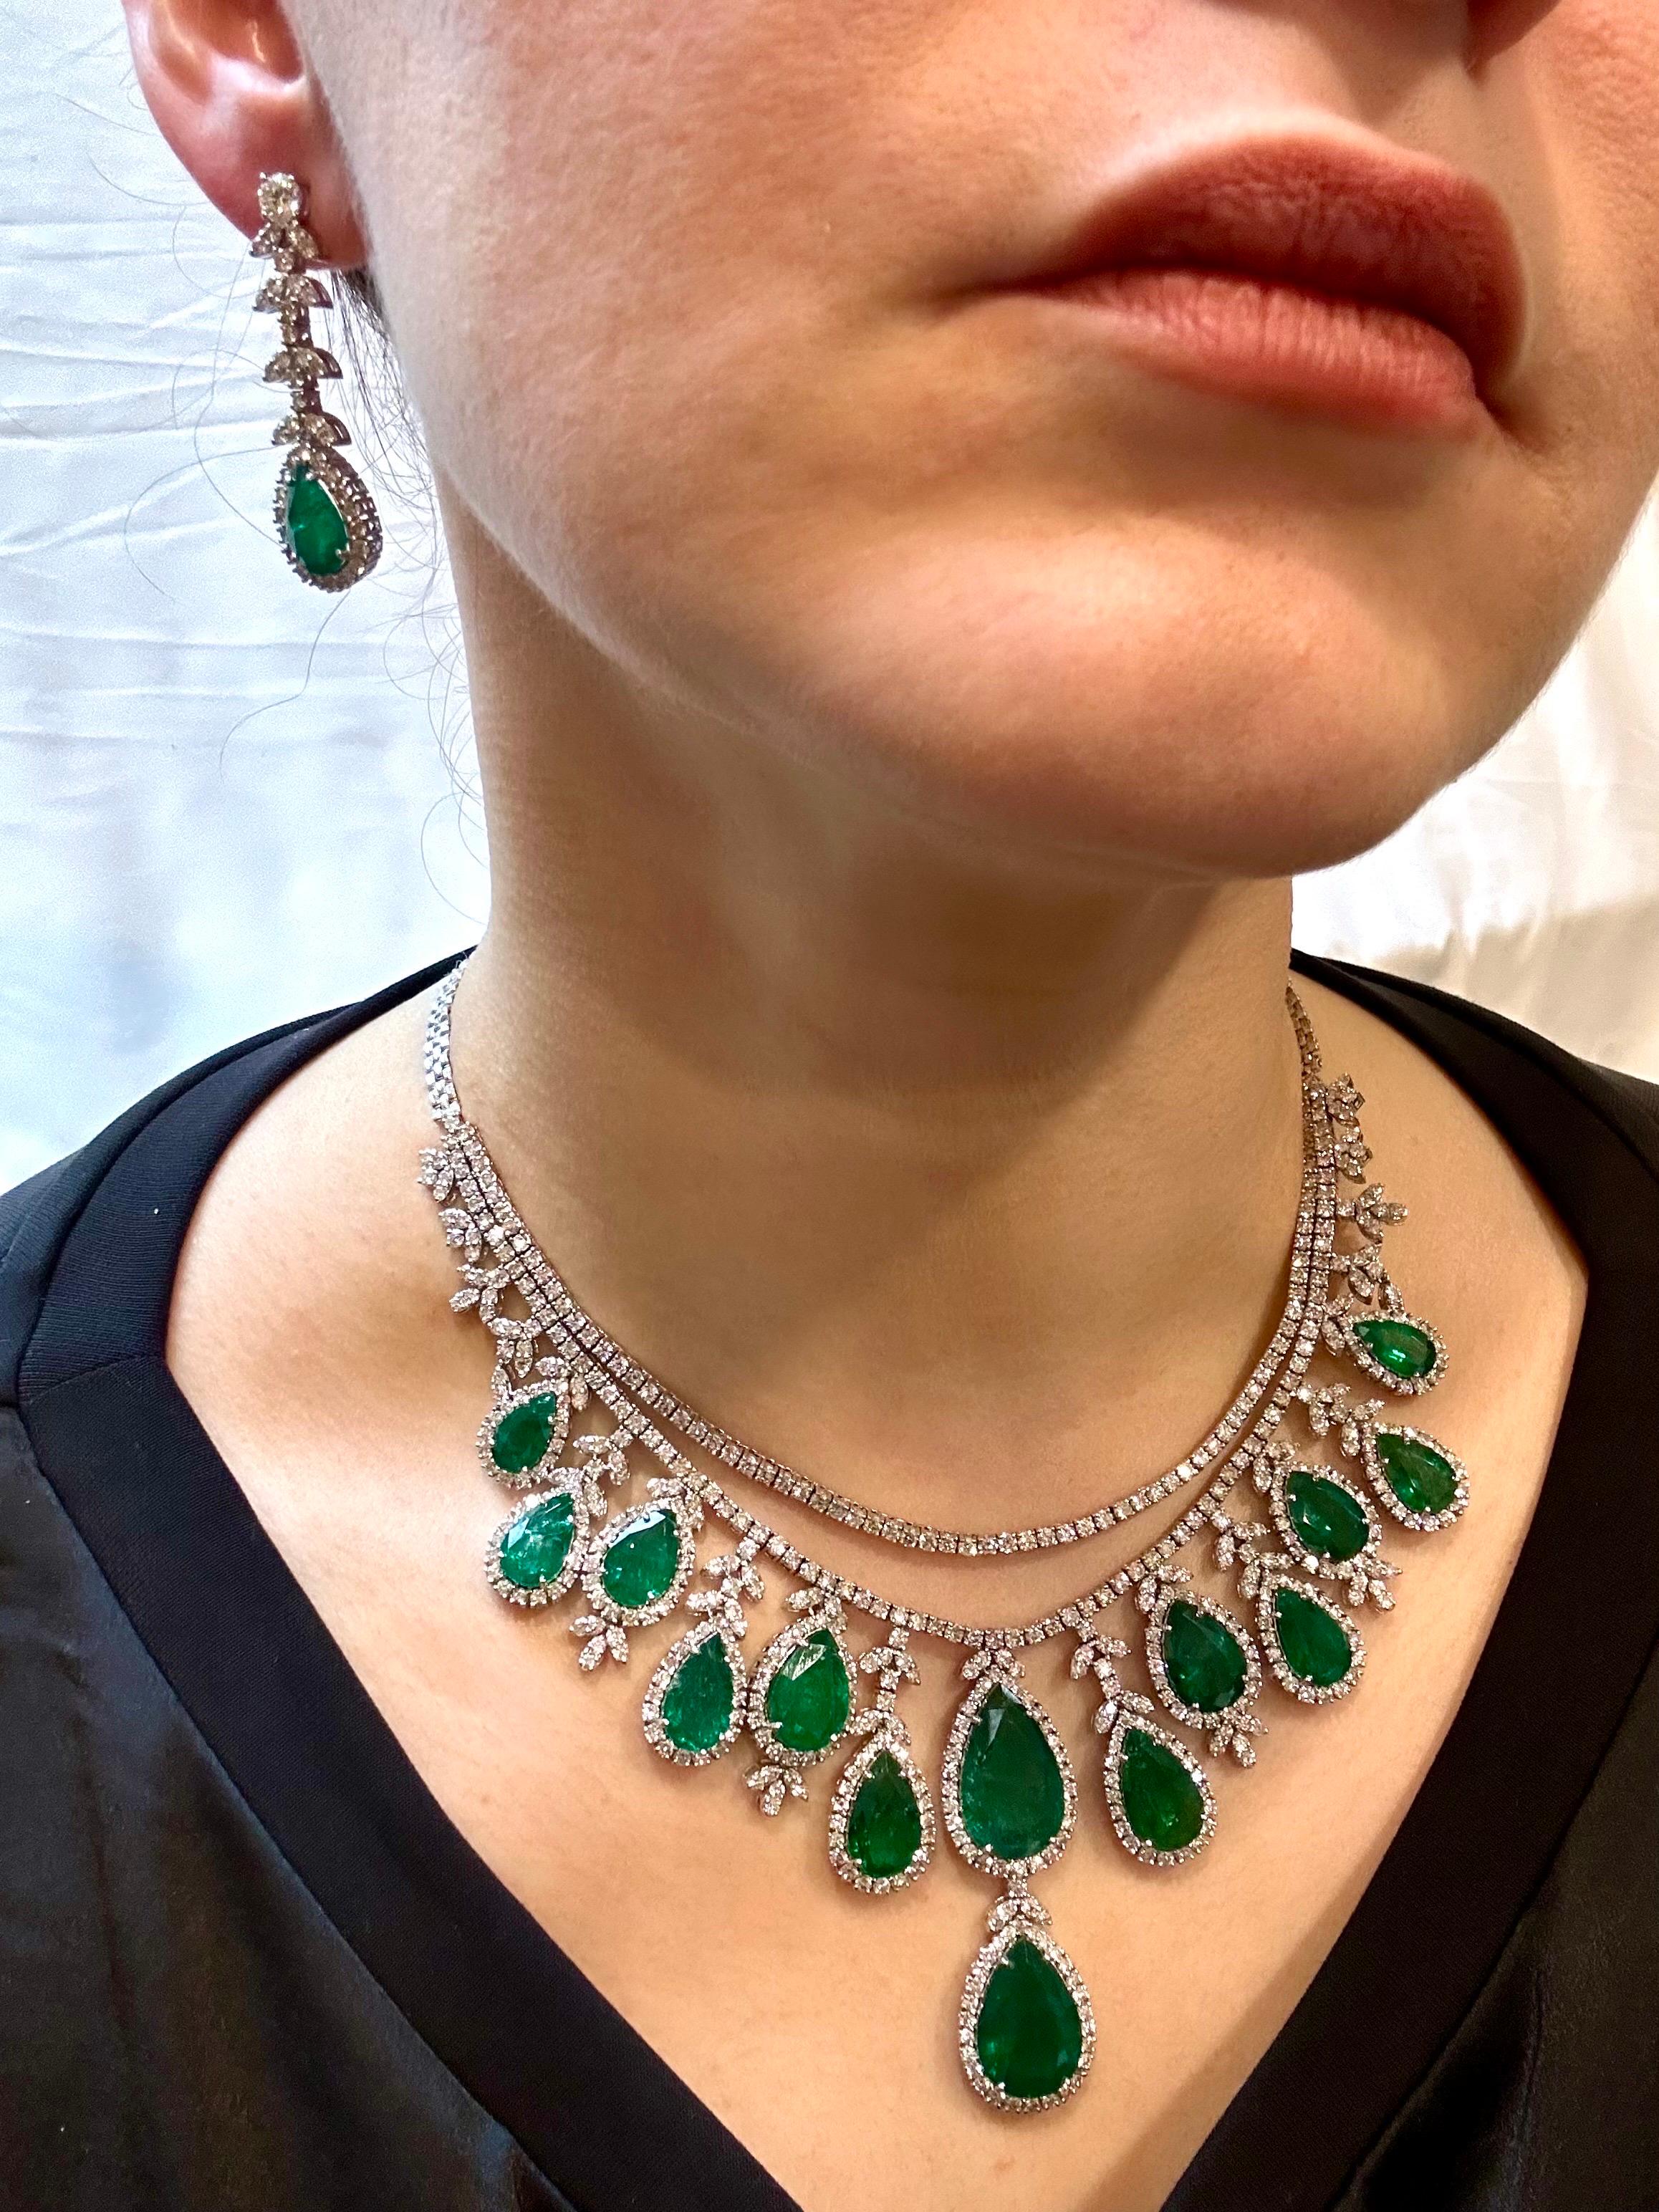 75 Ct Zambian Emerald and 30 Ct Diamond Necklace and Earring Bridal Suite For Sale 7